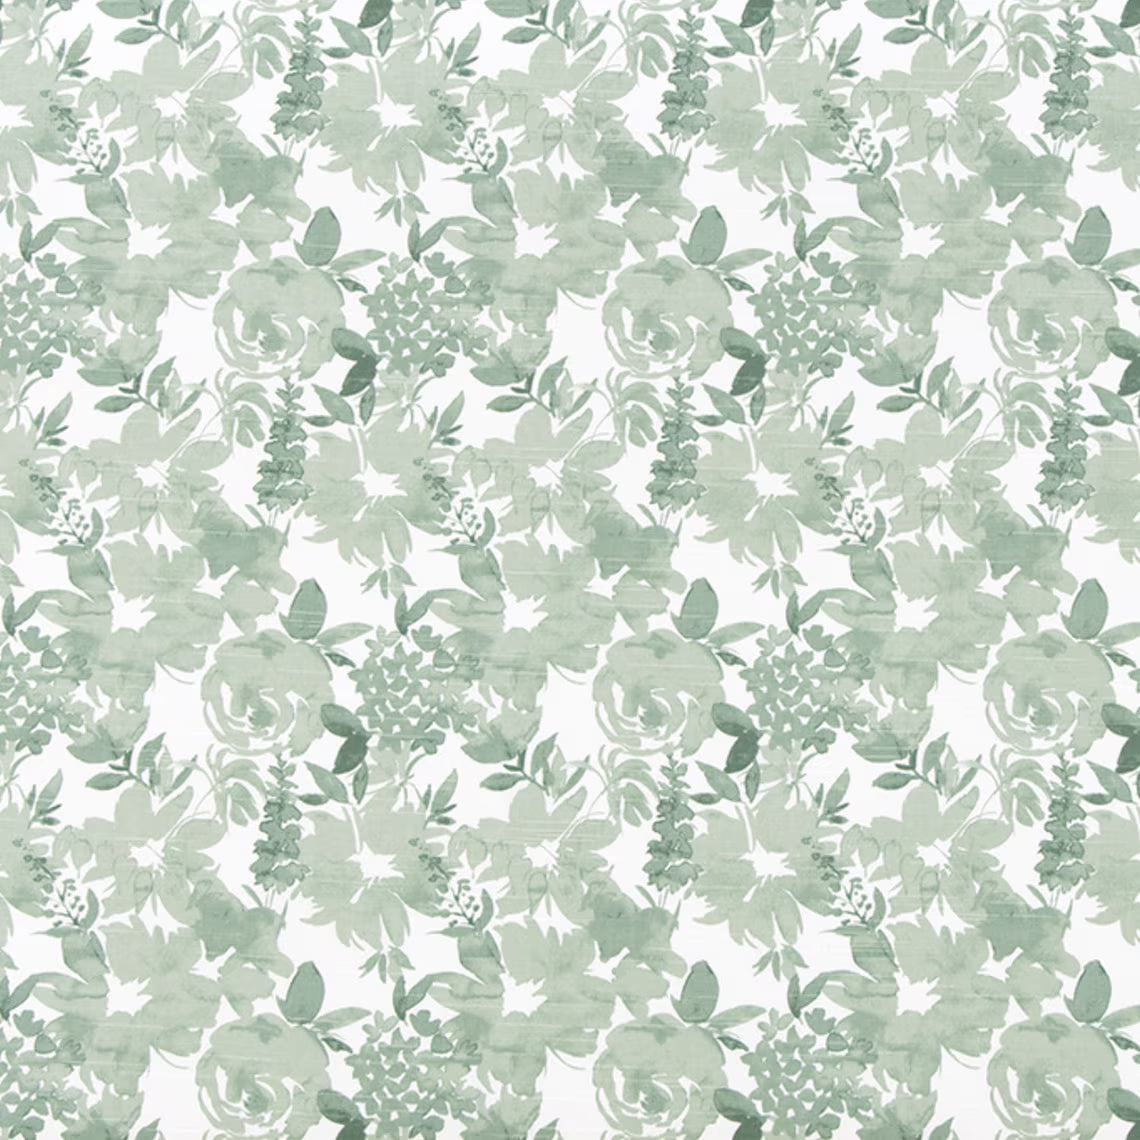 duvet cover in Zinnia Spruce Green Floral